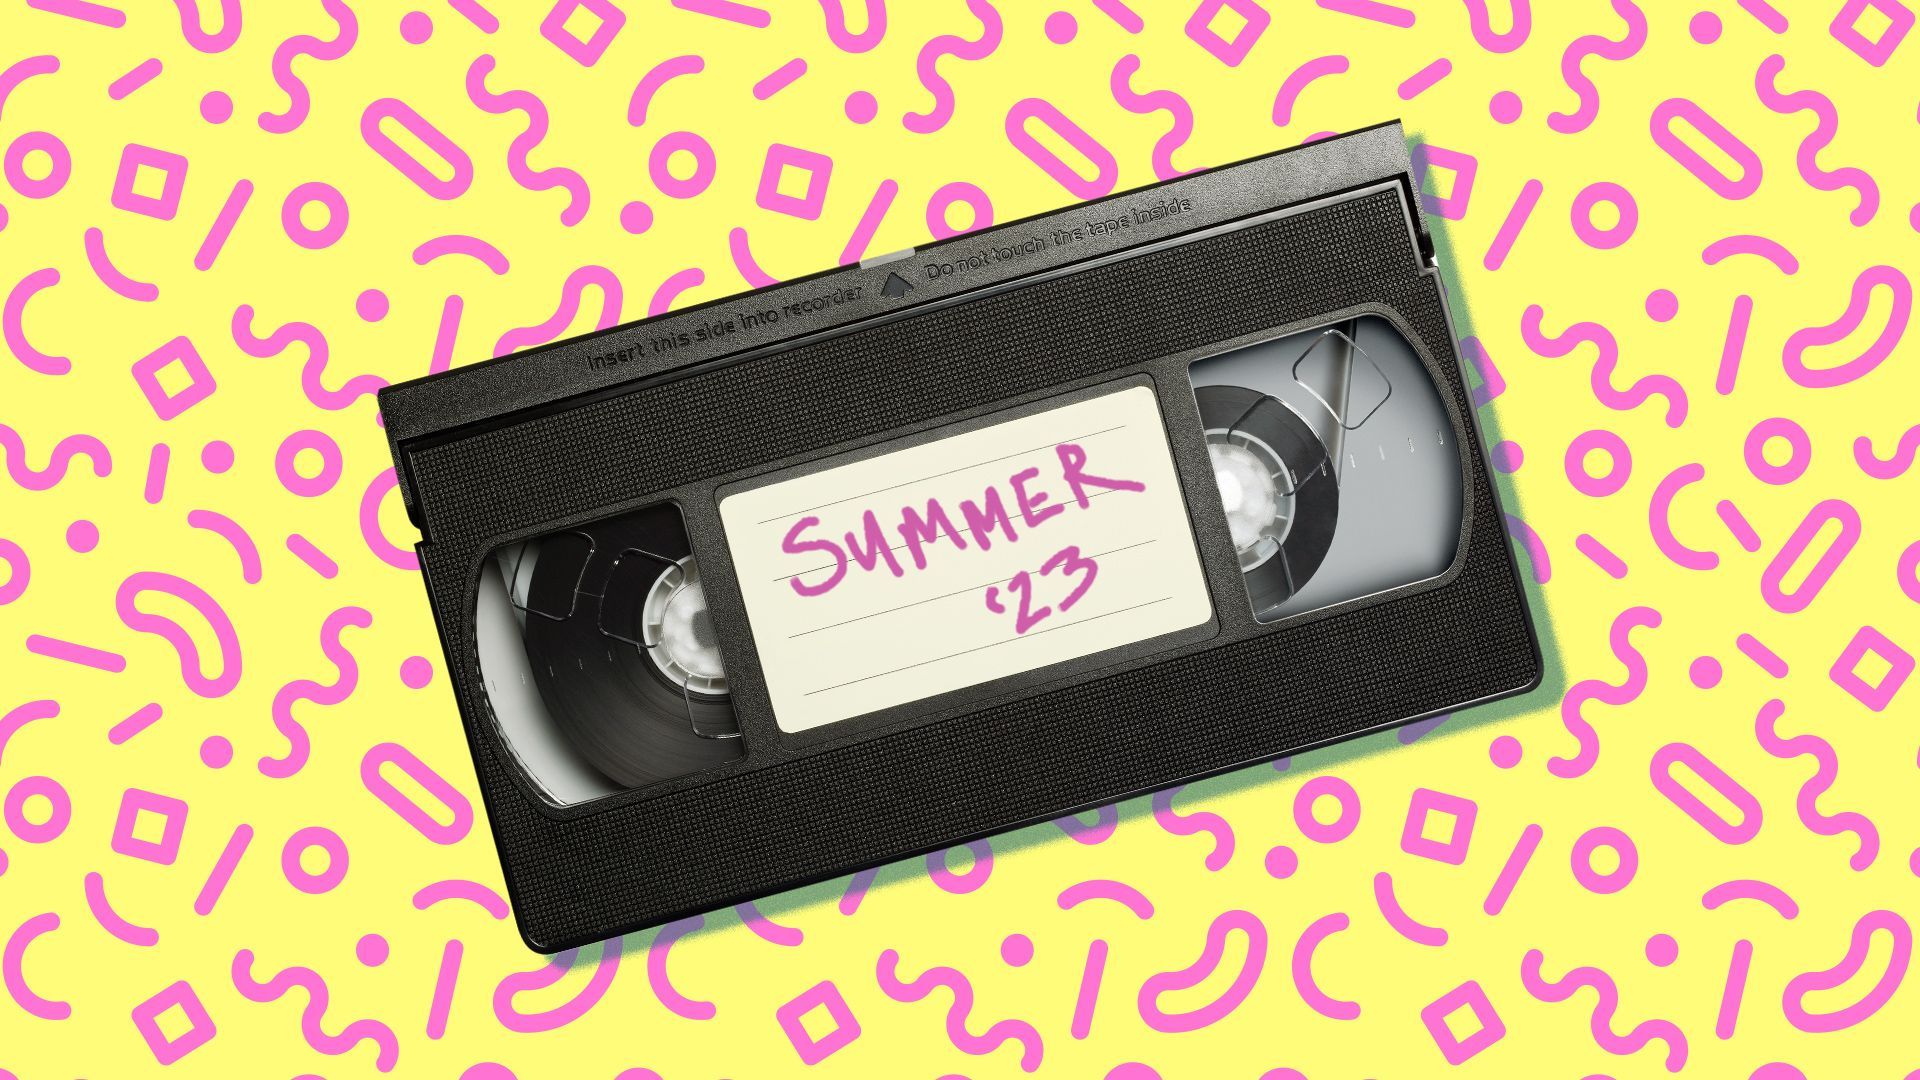 Illustration of a VHS tape with "Summer '23" written on the tape sticker. 